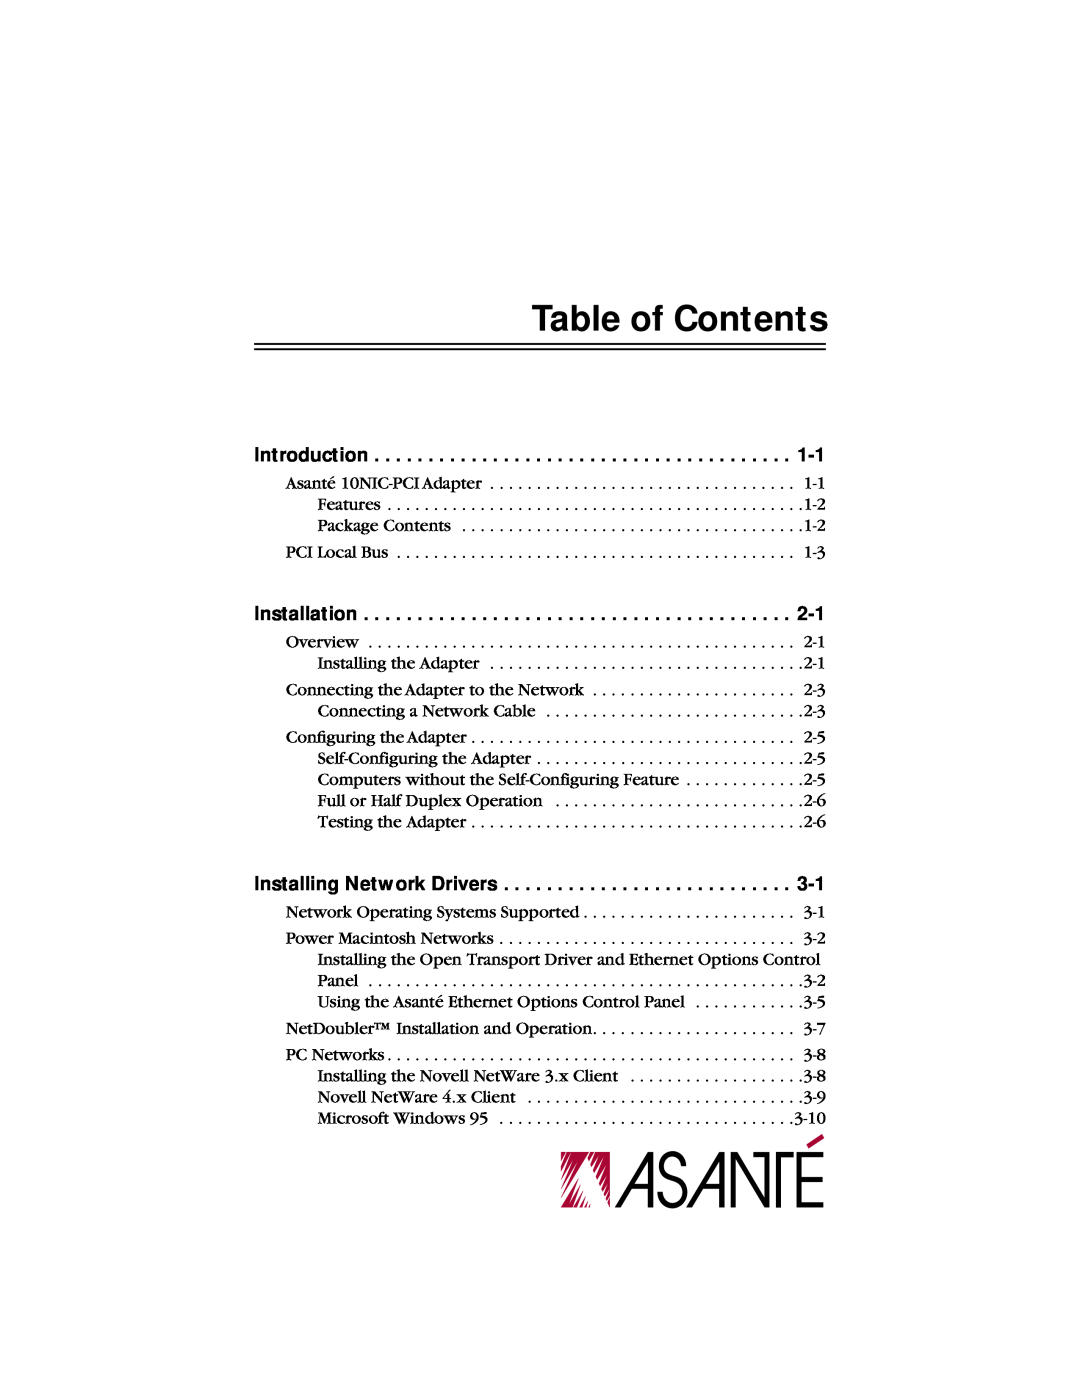 Asante Technologies 10NIC-PCITM manual Table of Contents, Draft 